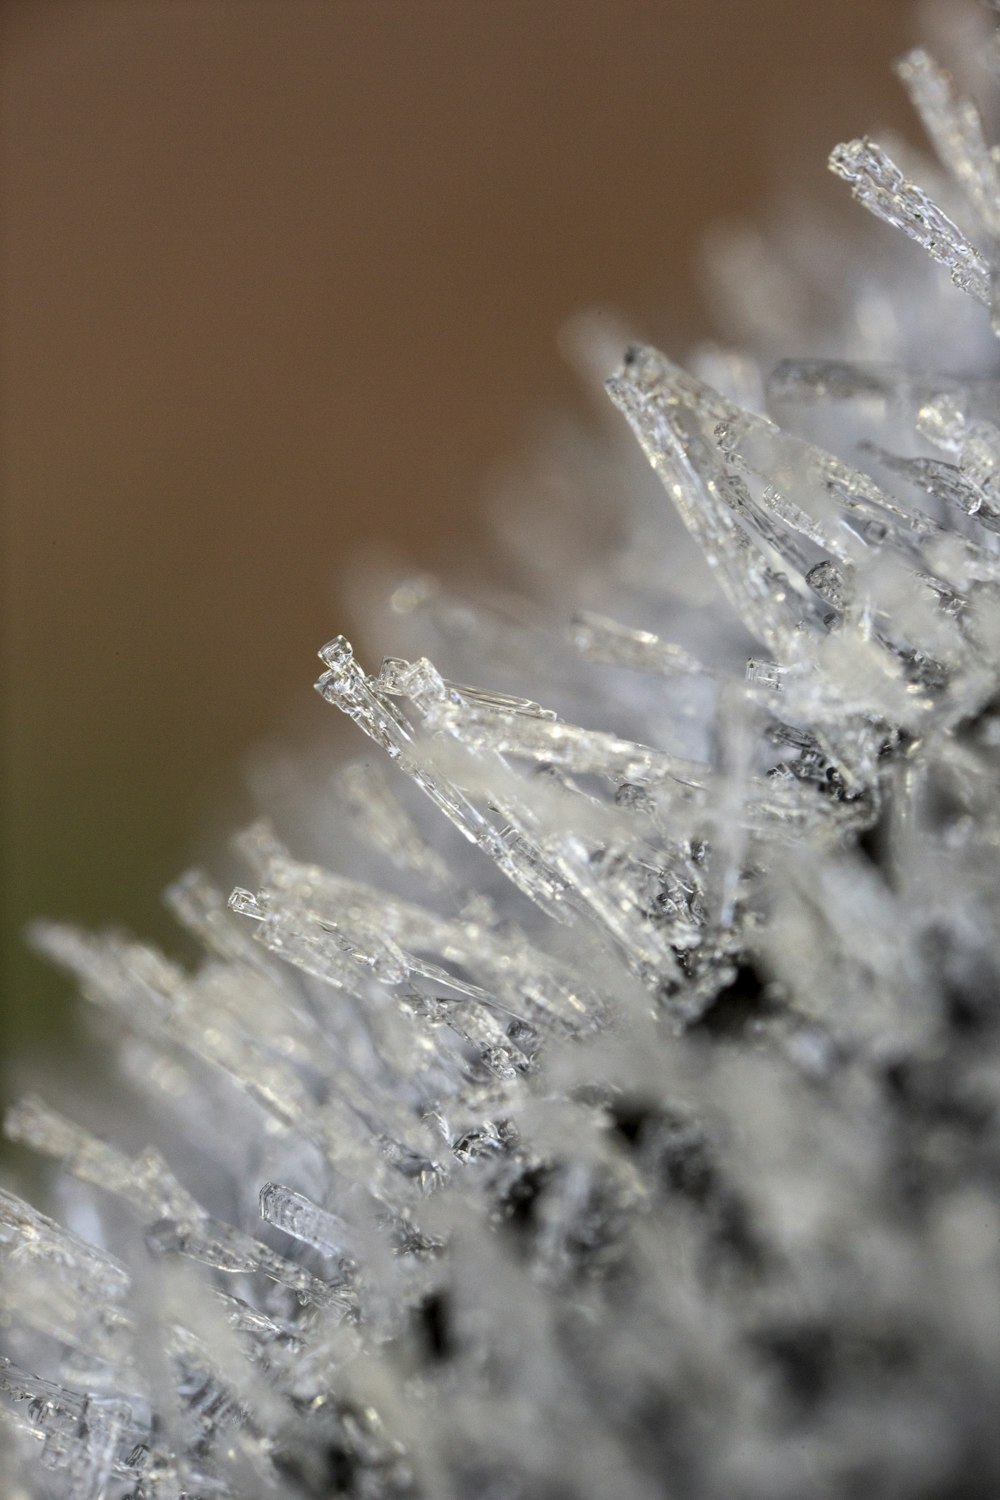 a close up view of some ice crystals